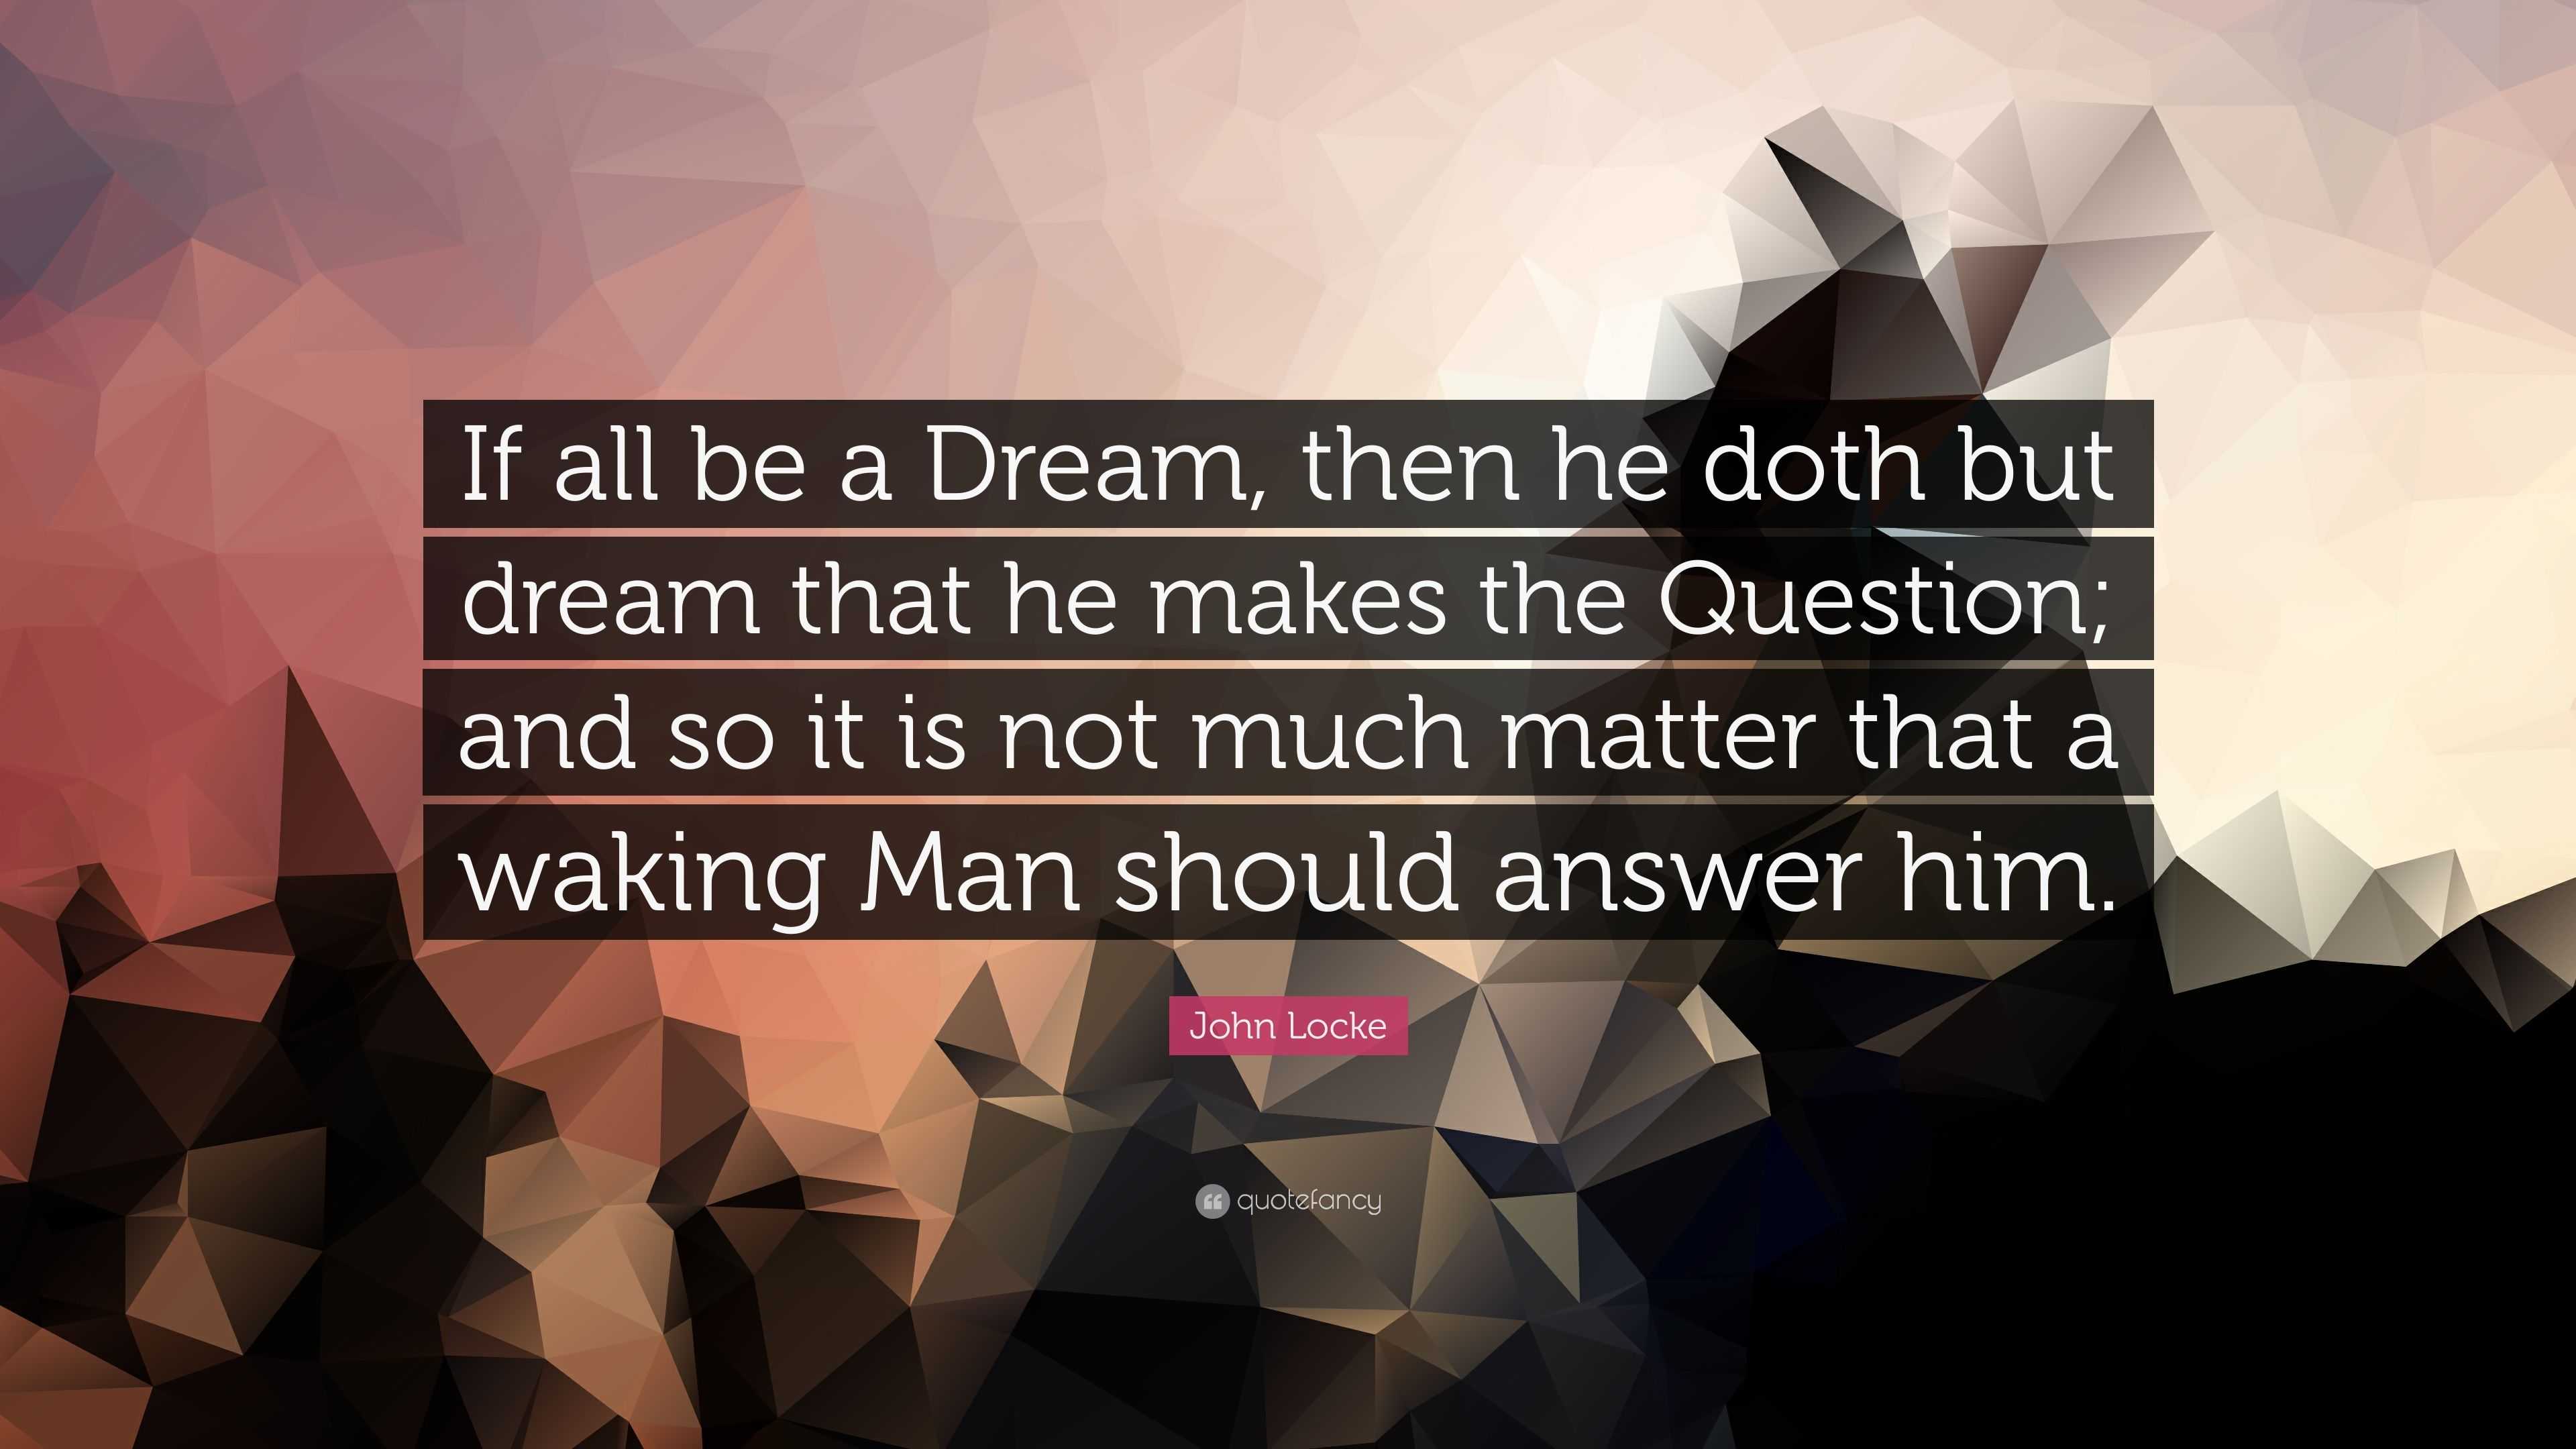 John Locke Quote: “If all be a Dream, then he doth but dream that